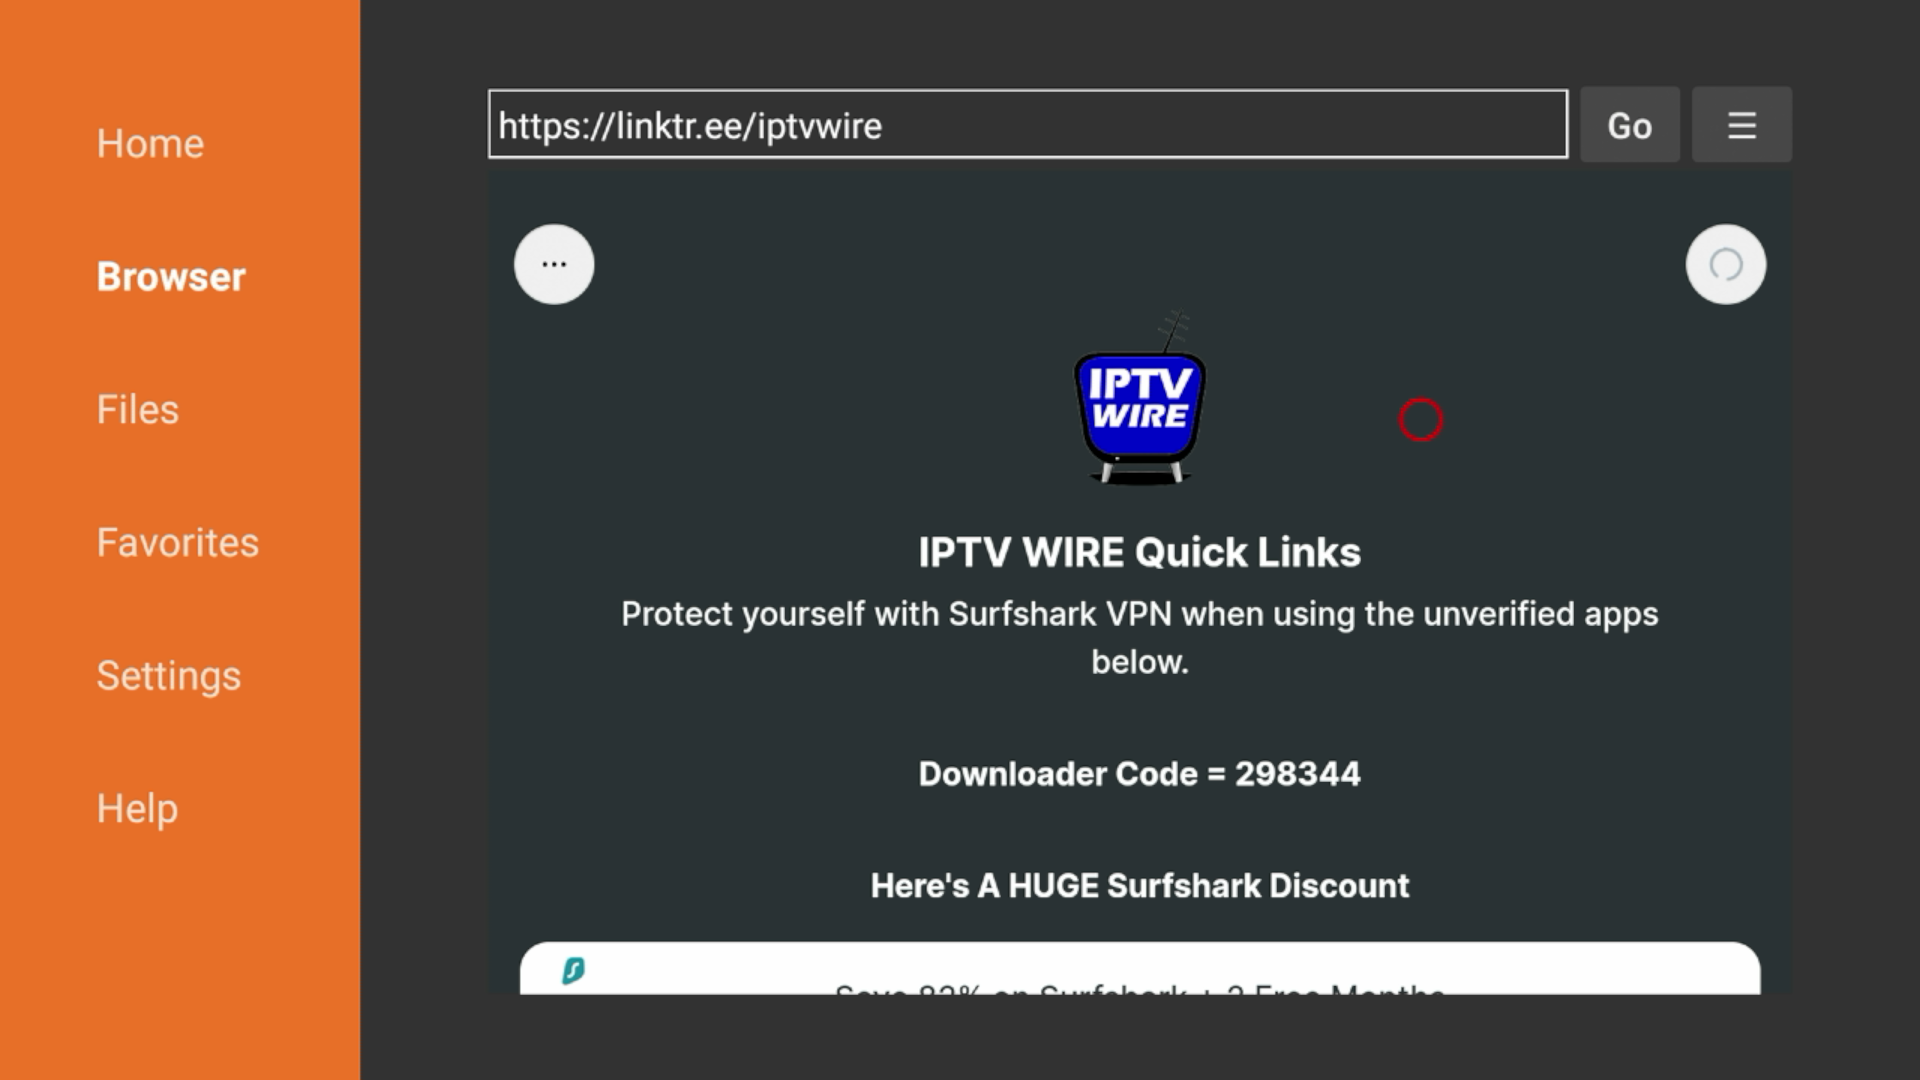 Wait a few seconds until you are redirected to the IPTV Wire Quick Links page.